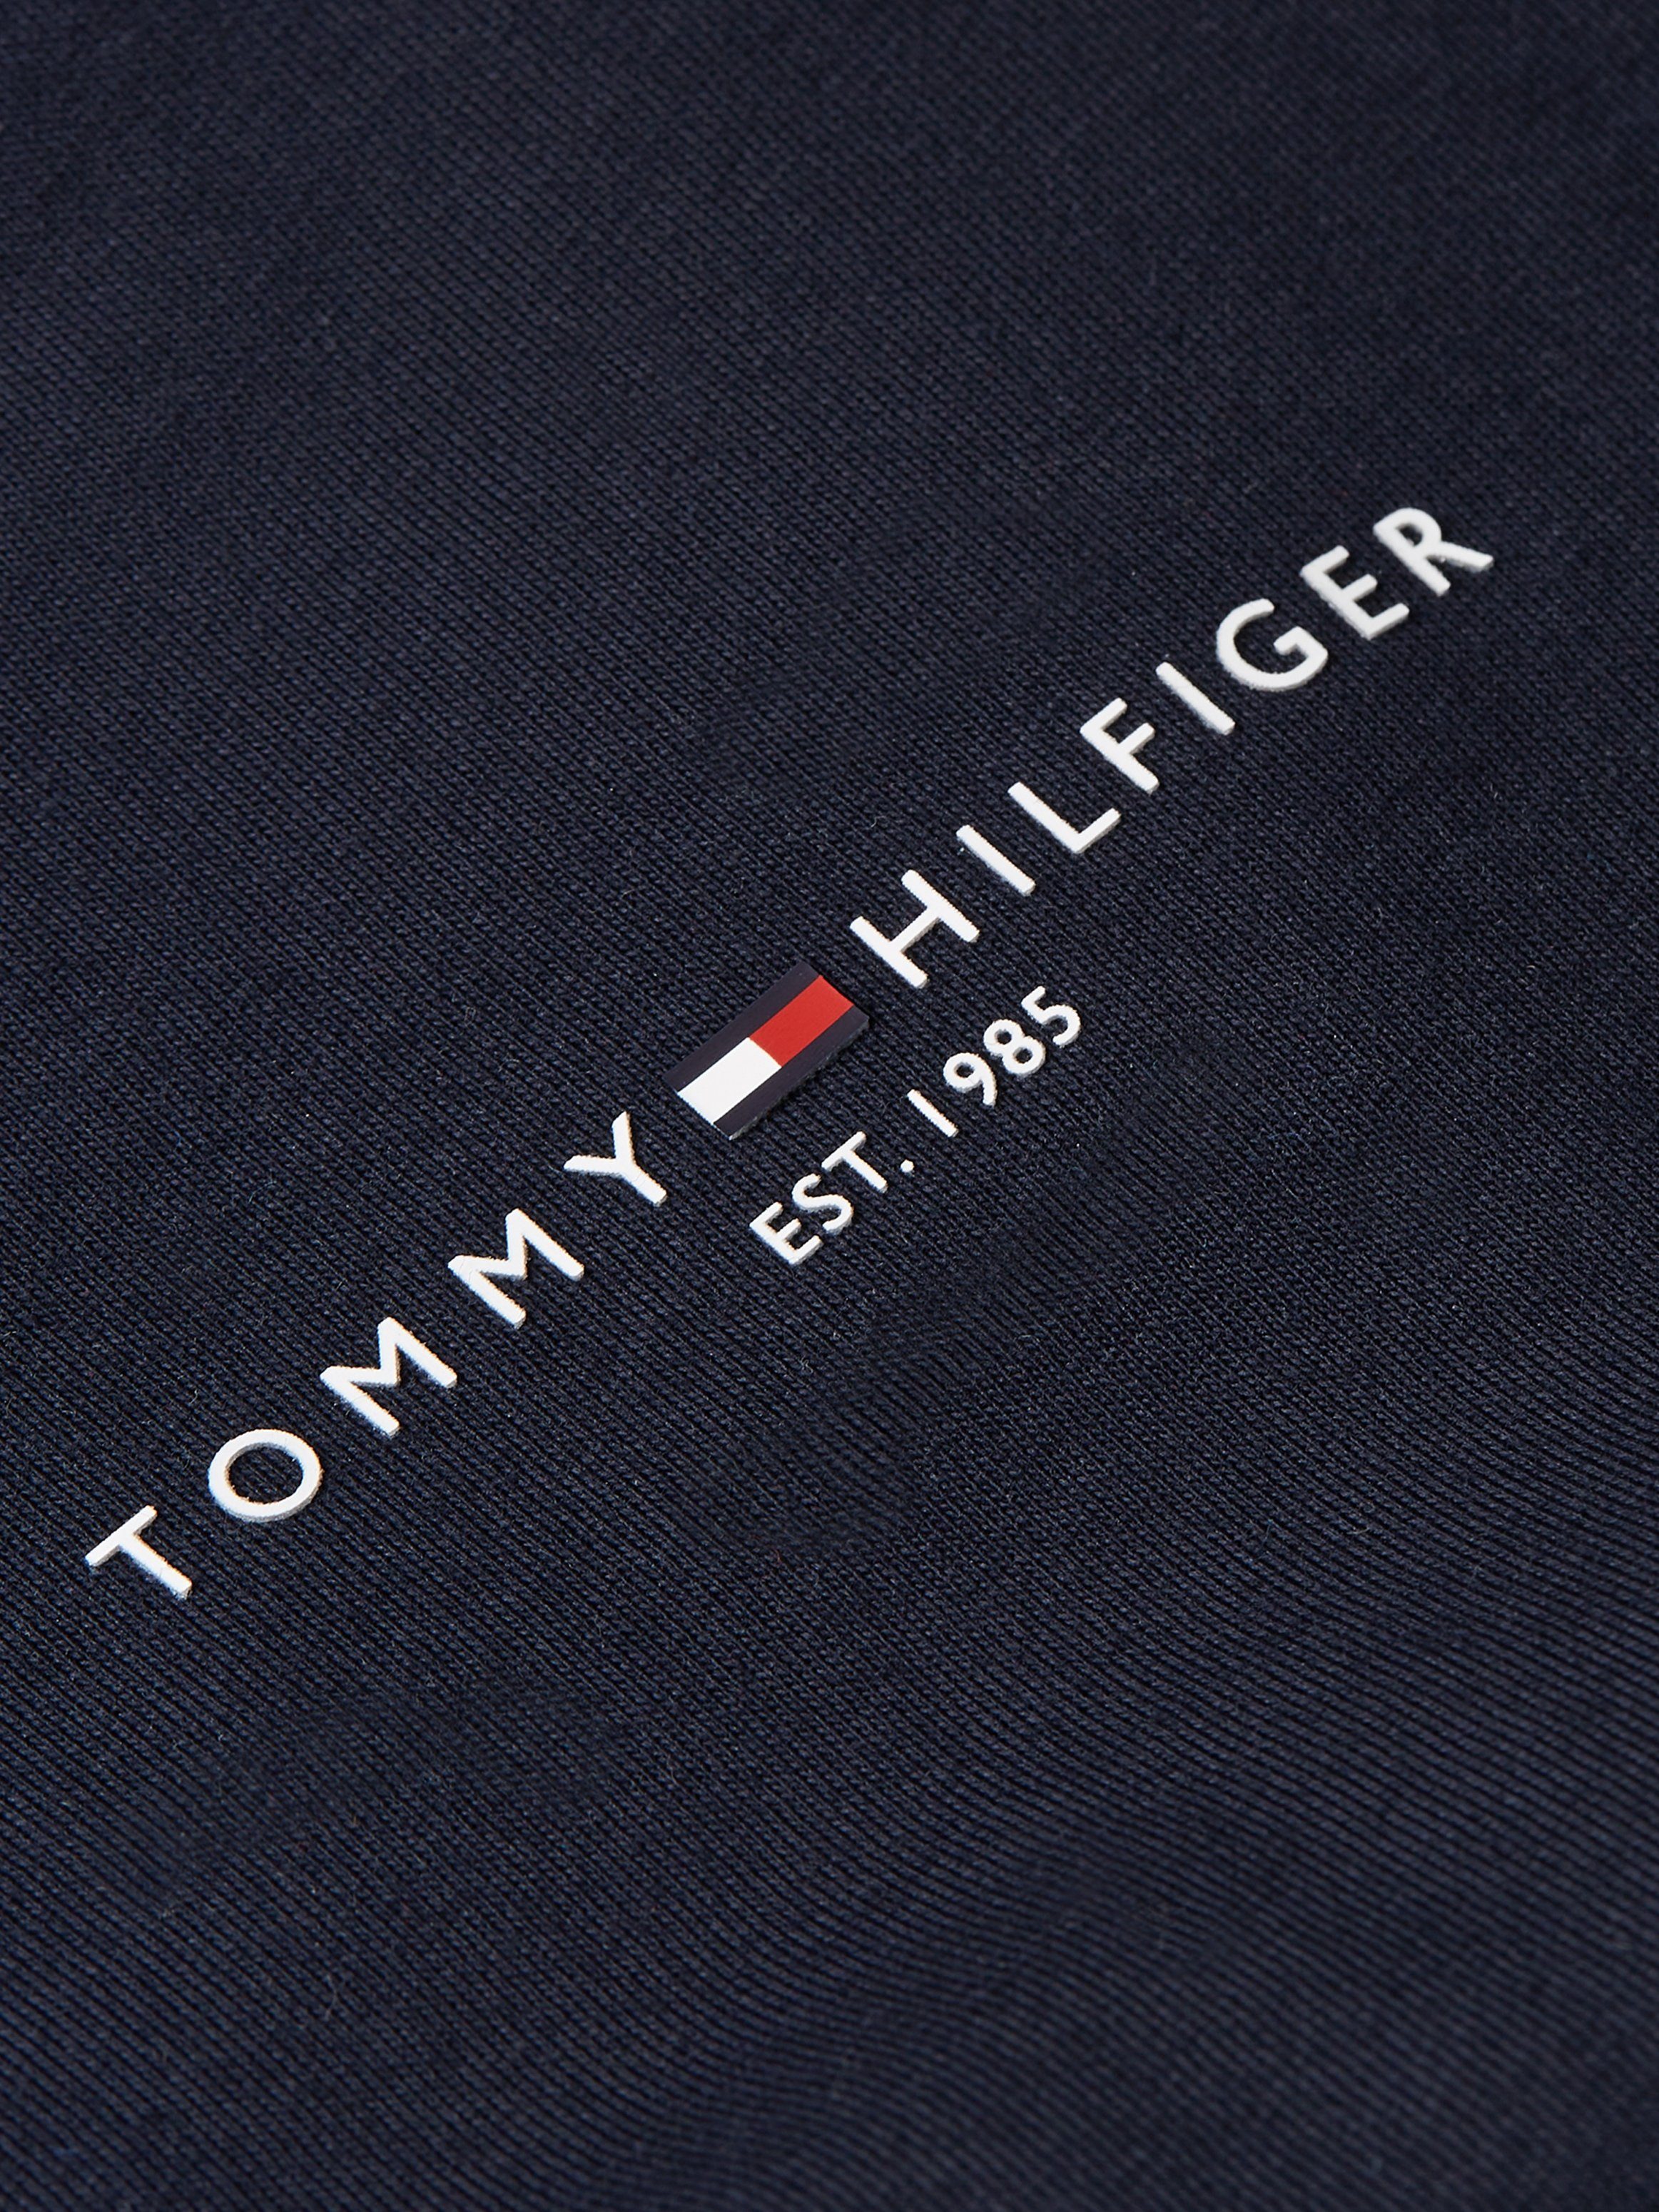 Hilfiger TOMMY LOGO TIPPED Tommy Sky T-Shirt TEE Desert